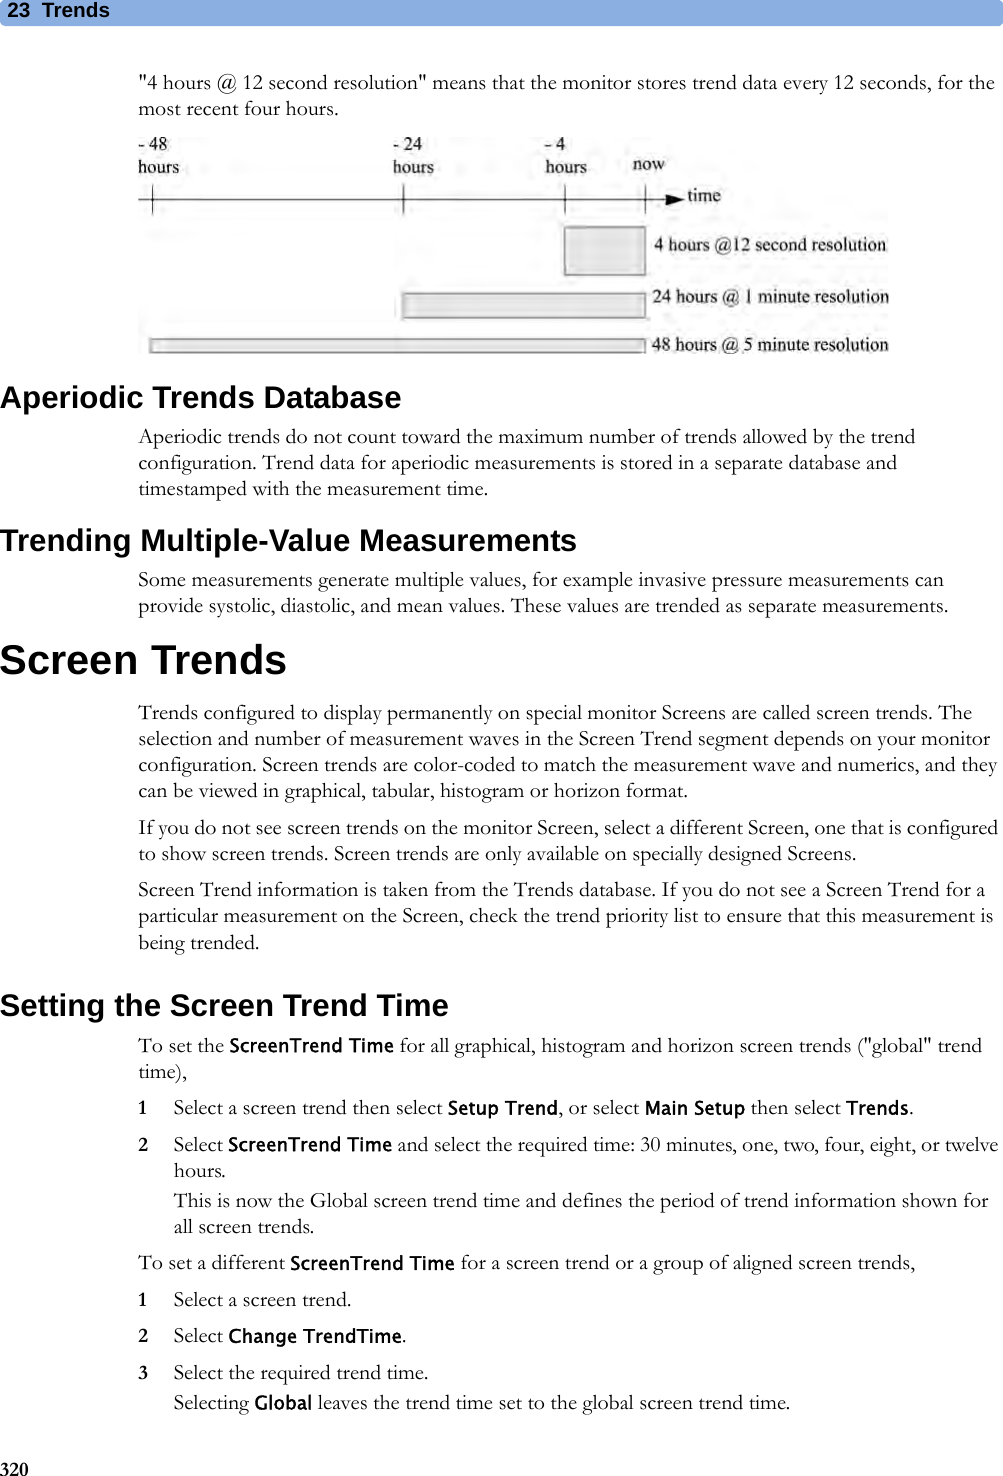 23 Trends320&quot;4 hours @ 12 second resolution&quot; means that the monitor stores trend data every 12 seconds, for the most recent four hours.Aperiodic Trends DatabaseAperiodic trends do not count toward the maximum number of trends allowed by the trend configuration. Trend data for aperiodic measurements is stored in a separate database and timestamped with the measurement time.Trending Multiple-Value MeasurementsSome measurements generate multiple values, for example invasive pressure measurements can provide systolic, diastolic, and mean values. These values are trended as separate measurements.Screen TrendsTrends configured to display permanently on special monitor Screens are called screen trends. The selection and number of measurement waves in the Screen Trend segment depends on your monitor configuration. Screen trends are color-coded to match the measurement wave and numerics, and they can be viewed in graphical, tabular, histogram or horizon format.If you do not see screen trends on the monitor Screen, select a different Screen, one that is configured to show screen trends. Screen trends are only available on specially designed Screens.Screen Trend information is taken from the Trends database. If you do not see a Screen Trend for a particular measurement on the Screen, check the trend priority list to ensure that this measurement is being trended.Setting the Screen Trend TimeTo set the ScreenTrend Time for all graphical, histogram and horizon screen trends (&quot;global&quot; trend time),1Select a screen trend then select Setup Trend, or select Main Setup then select Trends.2Select ScreenTrend Time and select the required time: 30 minutes, one, two, four, eight, or twelve hours.This is now the Global screen trend time and defines the period of trend information shown for all screen trends.To set a different ScreenTrend Time for a screen trend or a group of aligned screen trends,1Select a screen trend.2Select Change TrendTime.3Select the required trend time.Selecting Global leaves the trend time set to the global screen trend time.